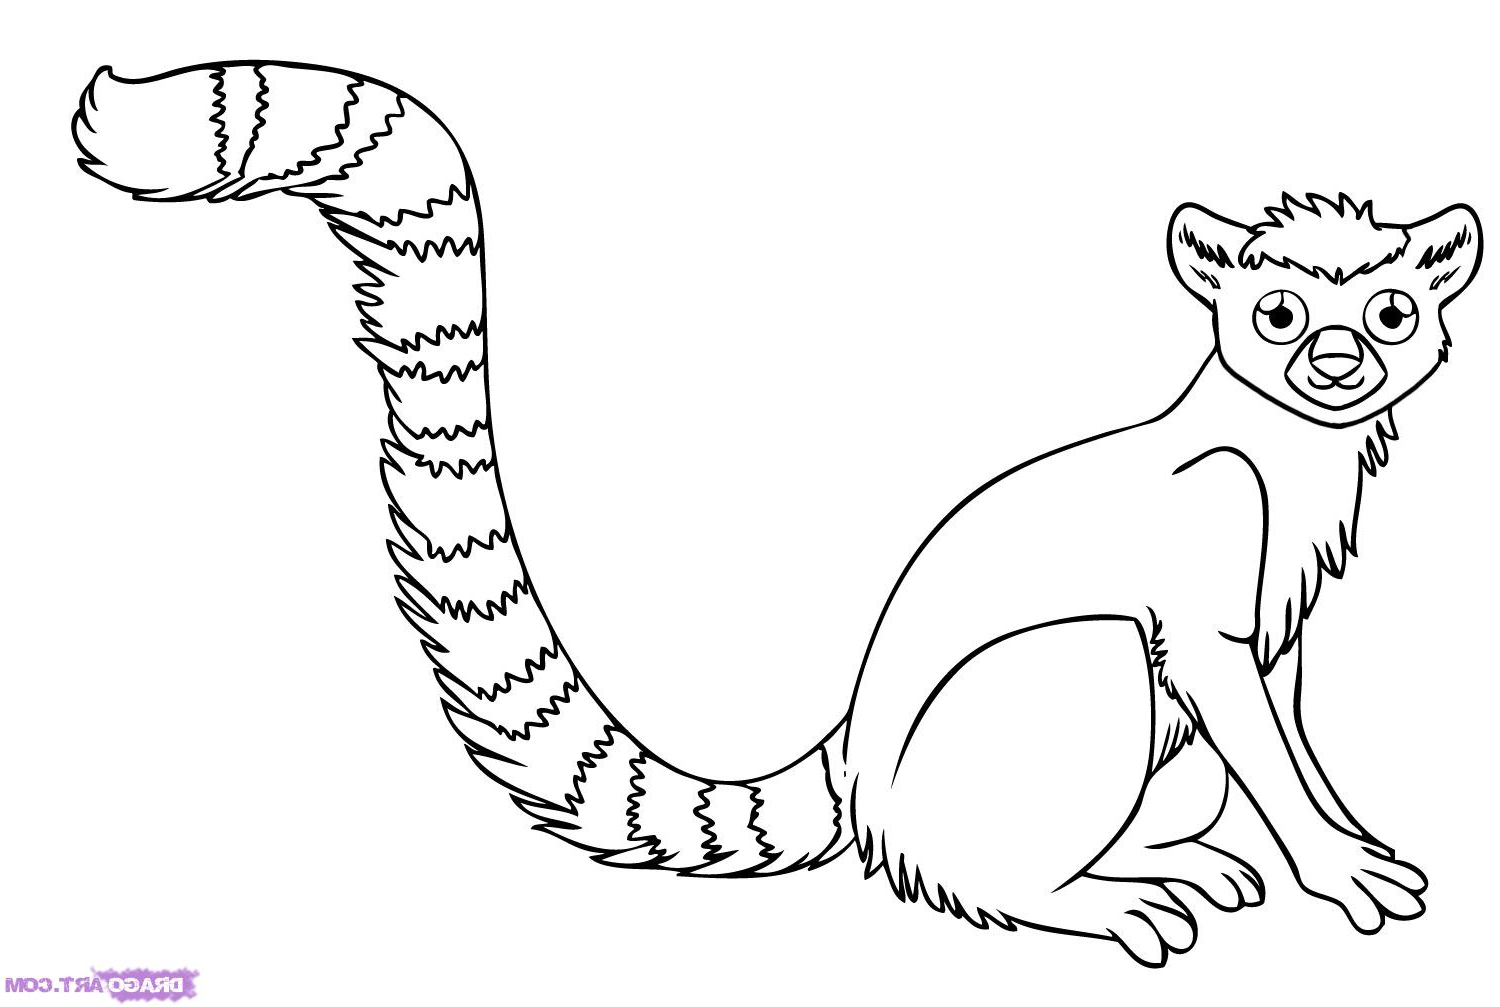 animal tails coloring pages rainforest animal drawing at getdrawingscom free for animal pages tails coloring 